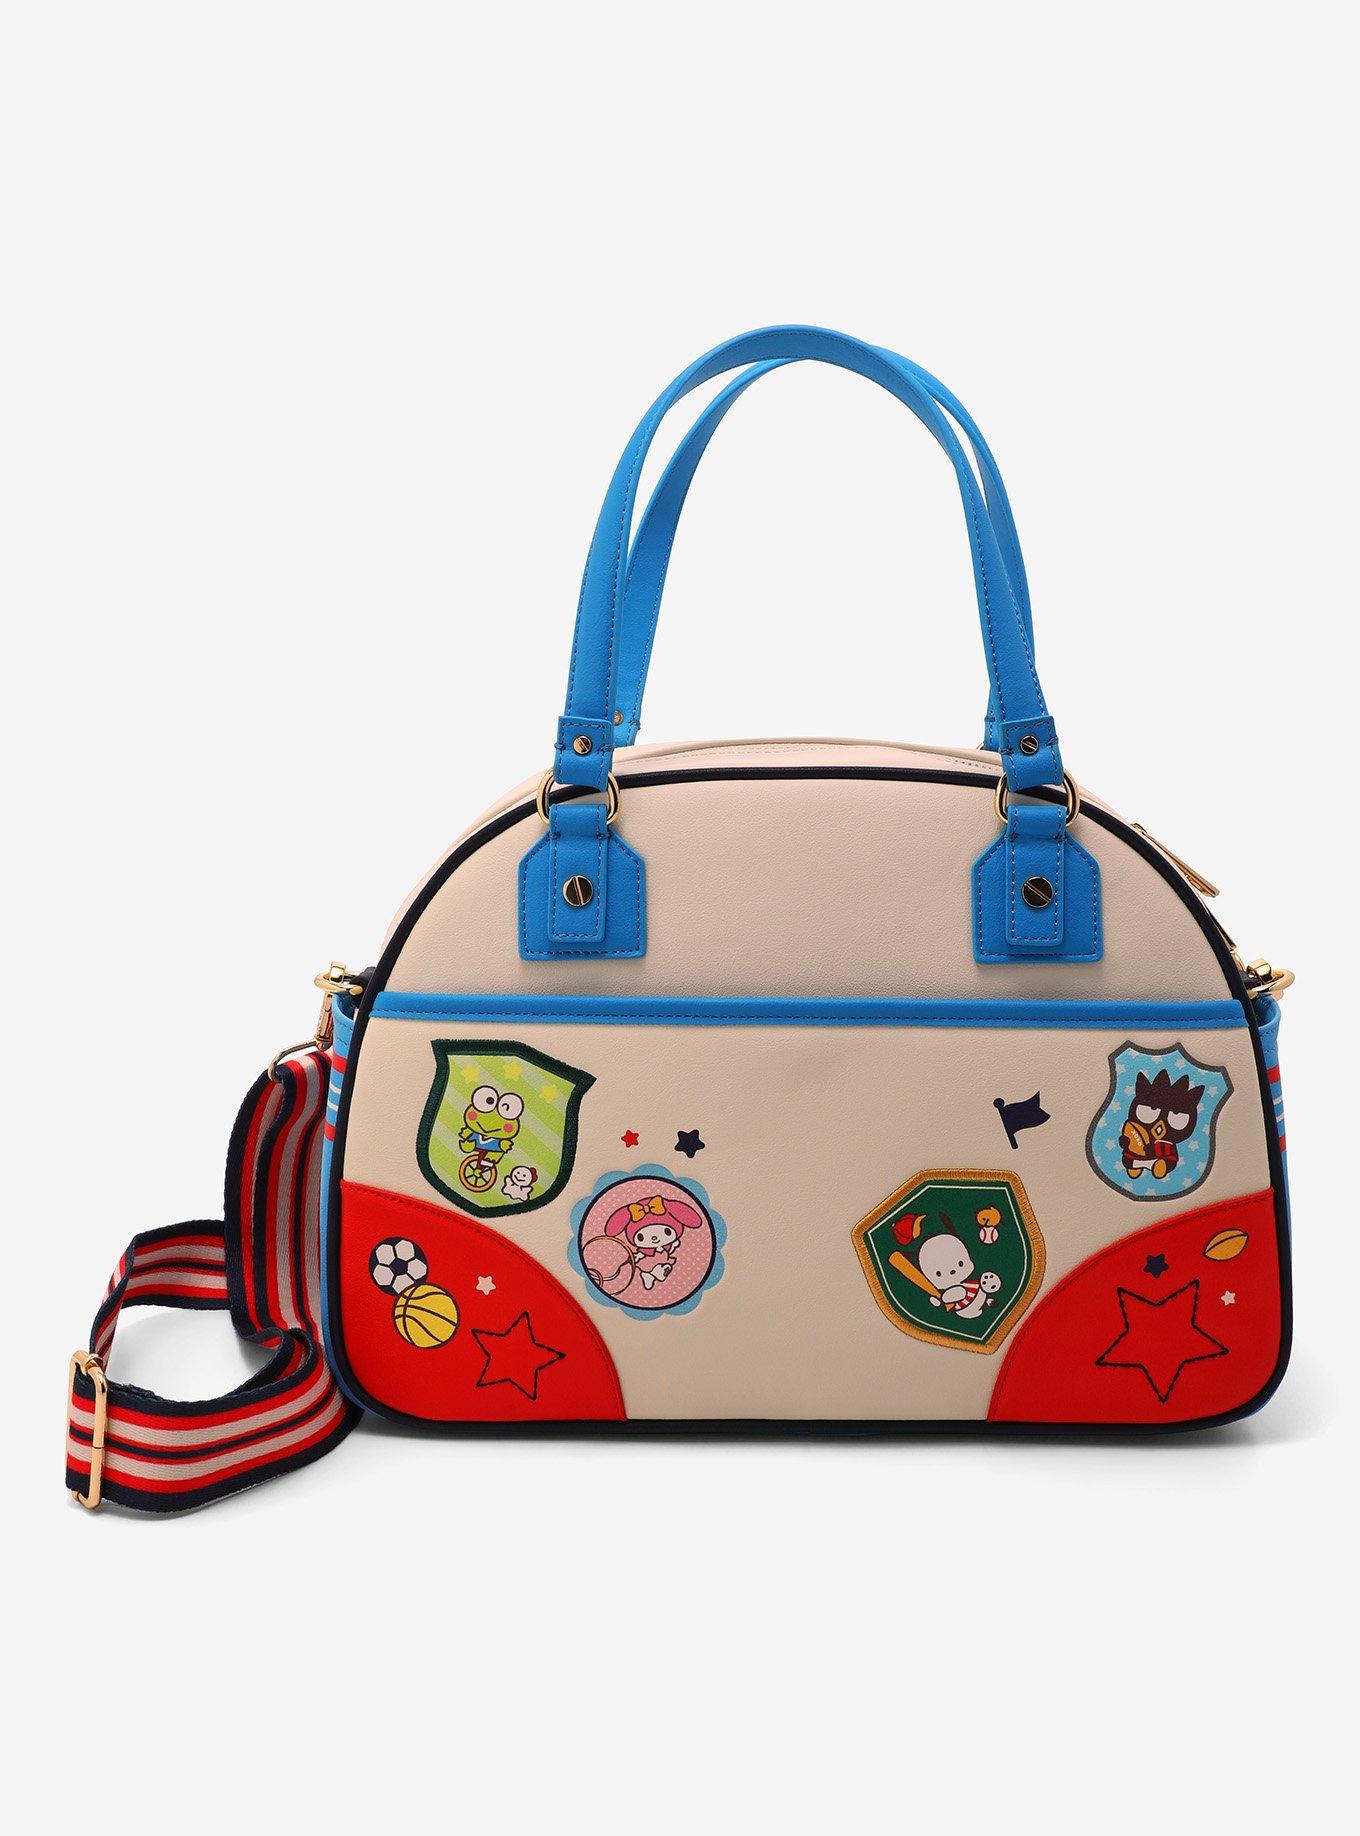 Sanrio Hello Kitty and Friends Sports Crossbody Tote Bag - BoxLunch Exclusive, , hi-res